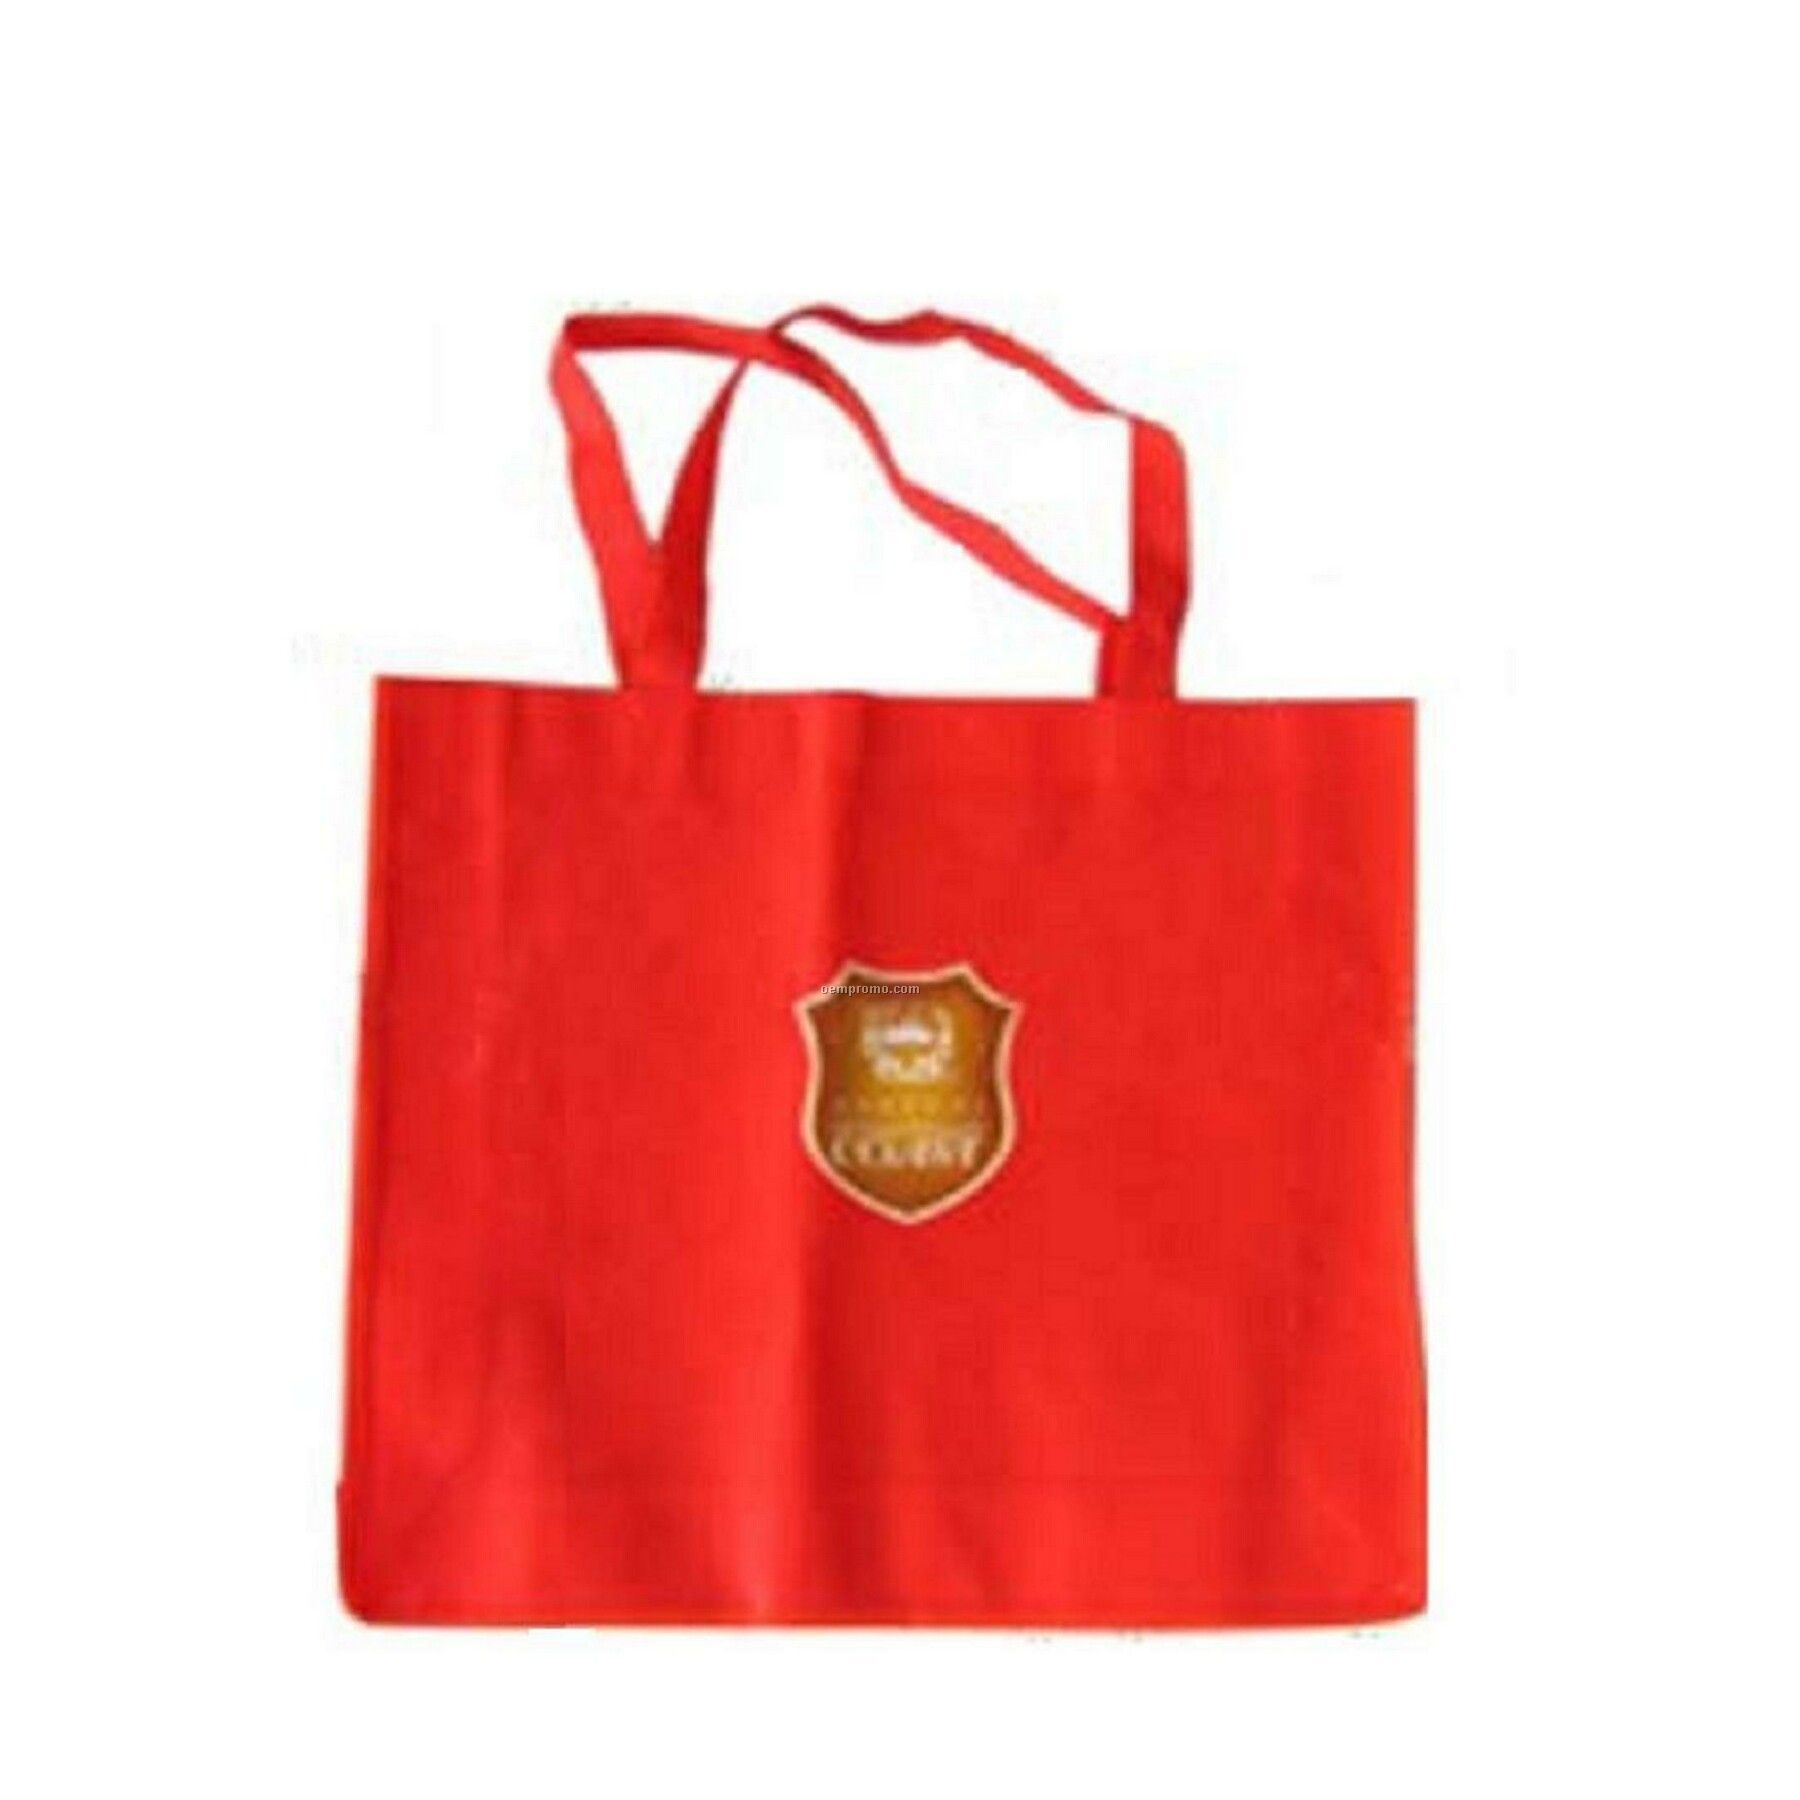 High Quality Non Woven Tote Bag. 80 Gsm Fabric, Measures 15